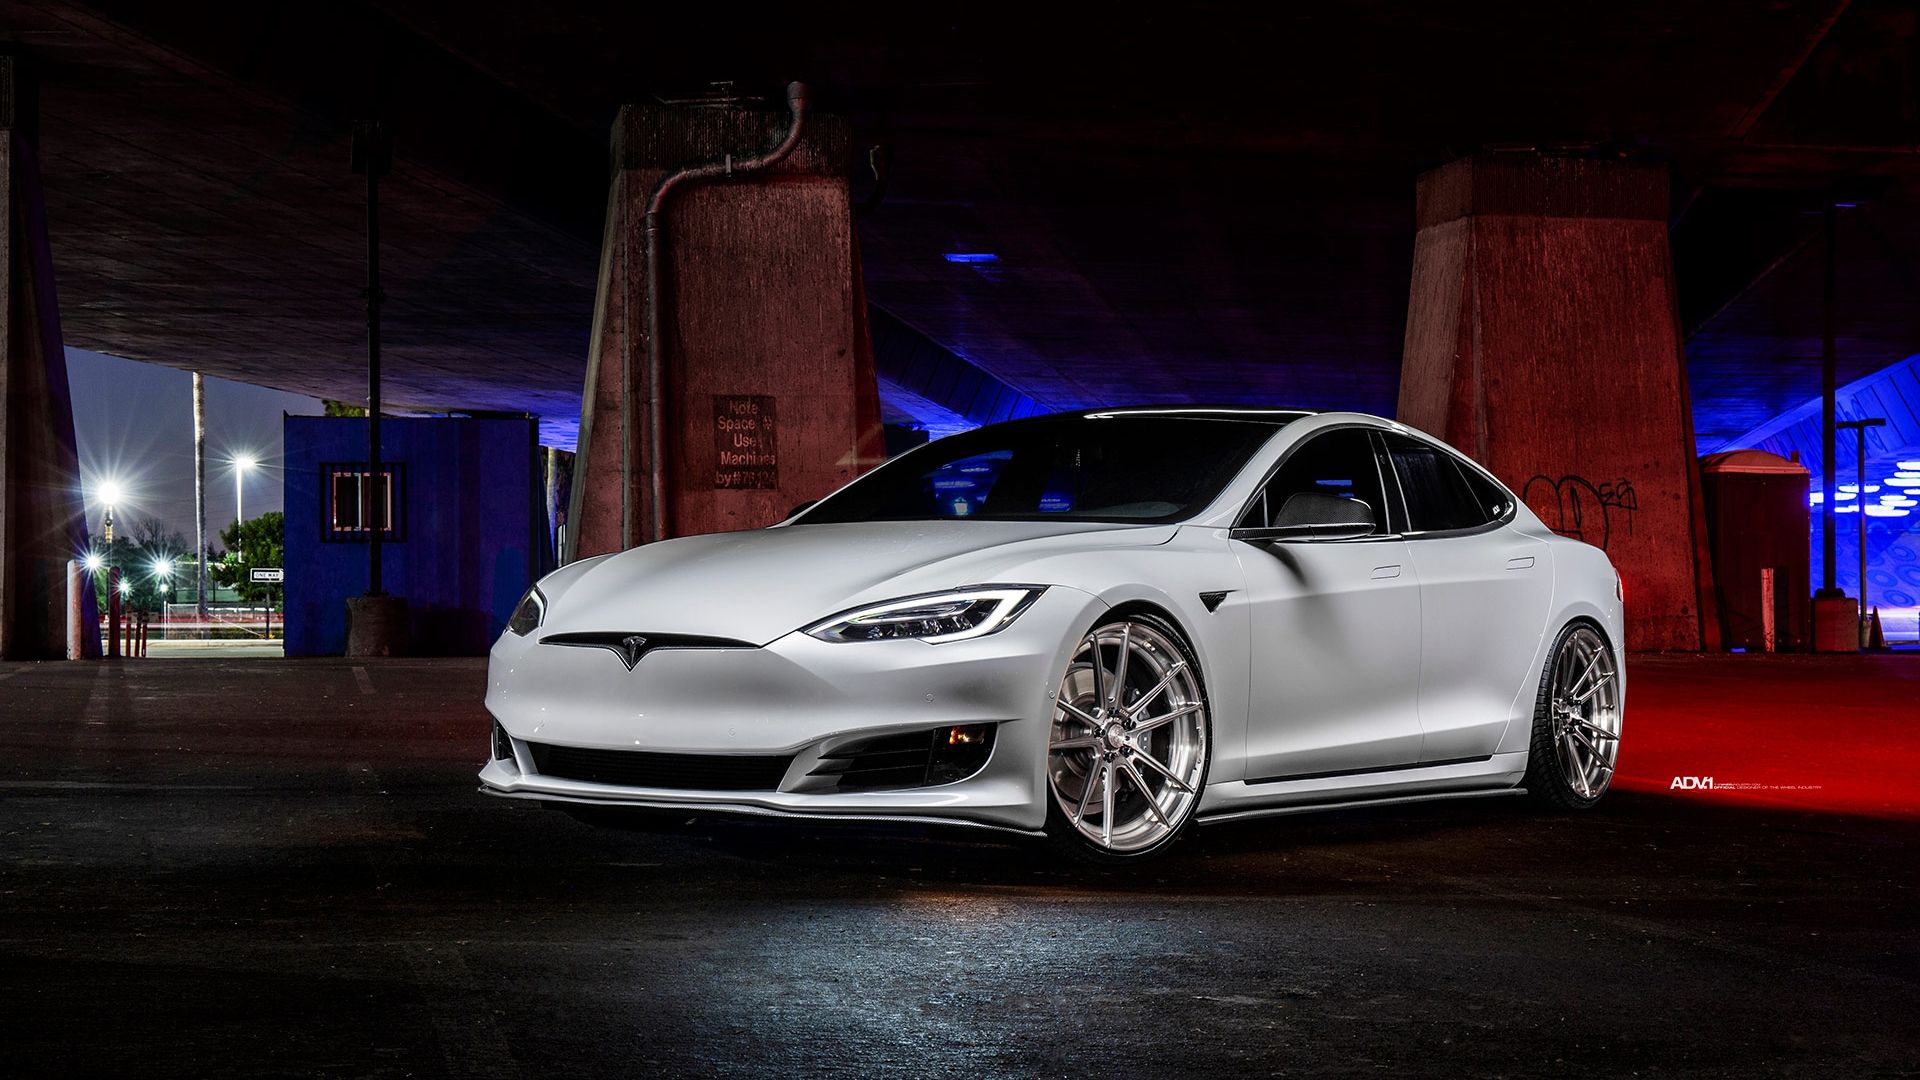 Download 1920x1080 Tesla Model S, White, Electric Cars Wallpaper for Widescreen